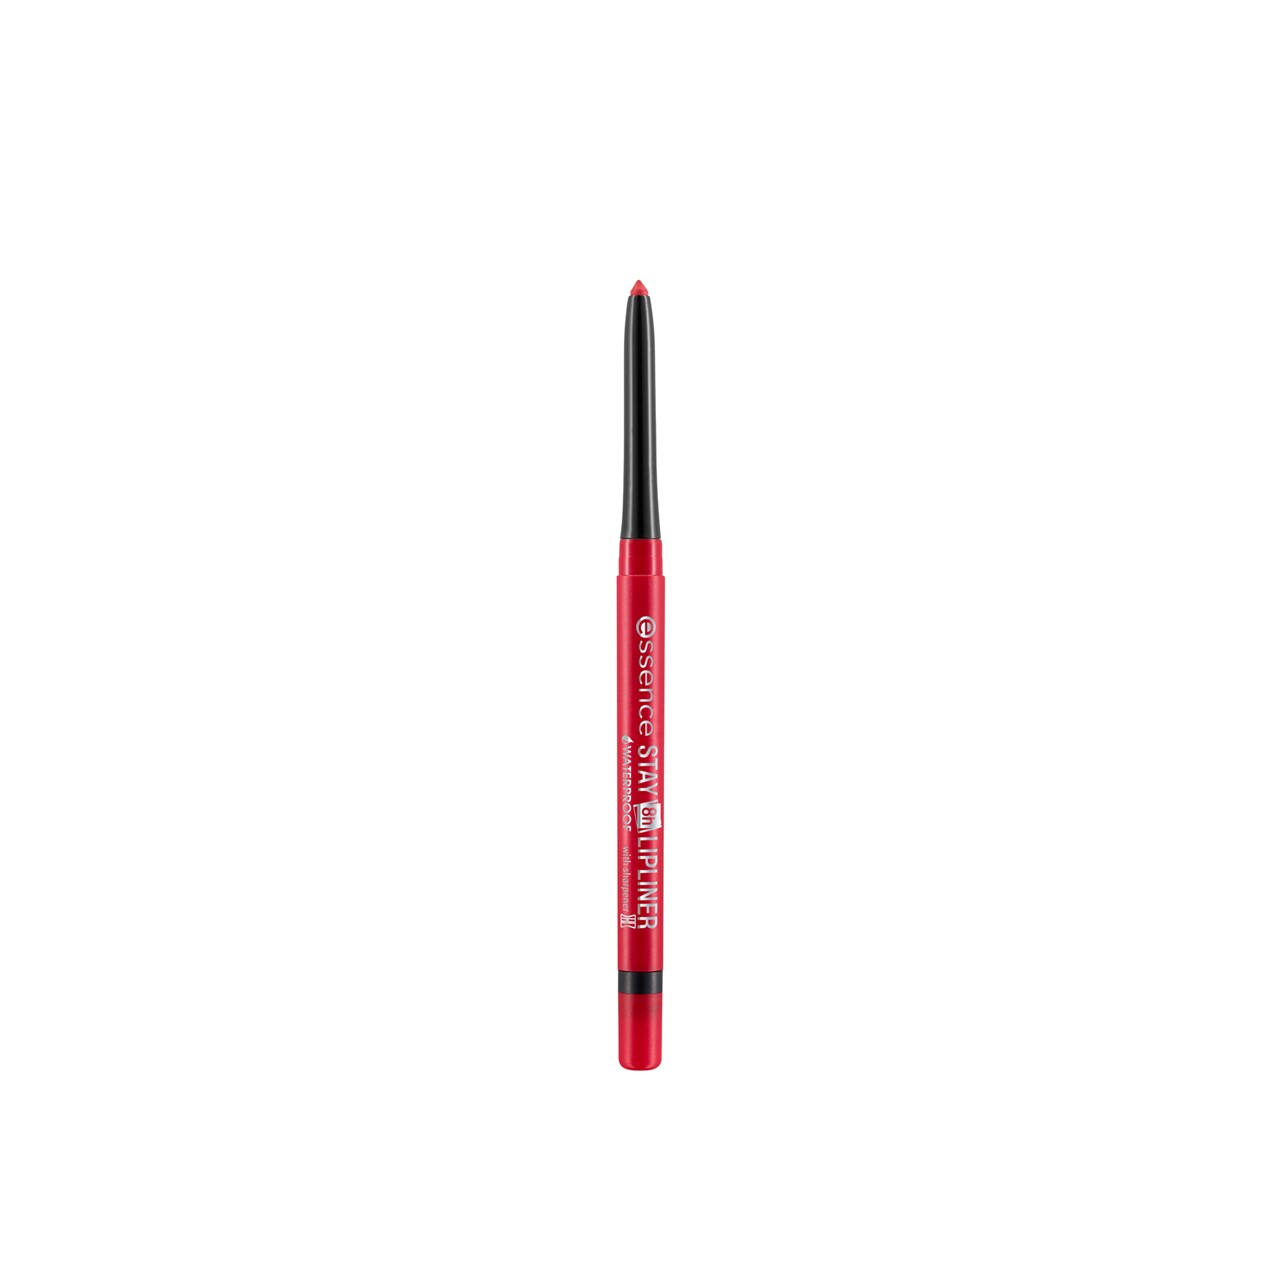 essence Stay 8h Waterproof Lipliner 06 You and Me Ship 0.28g (0.01oz)